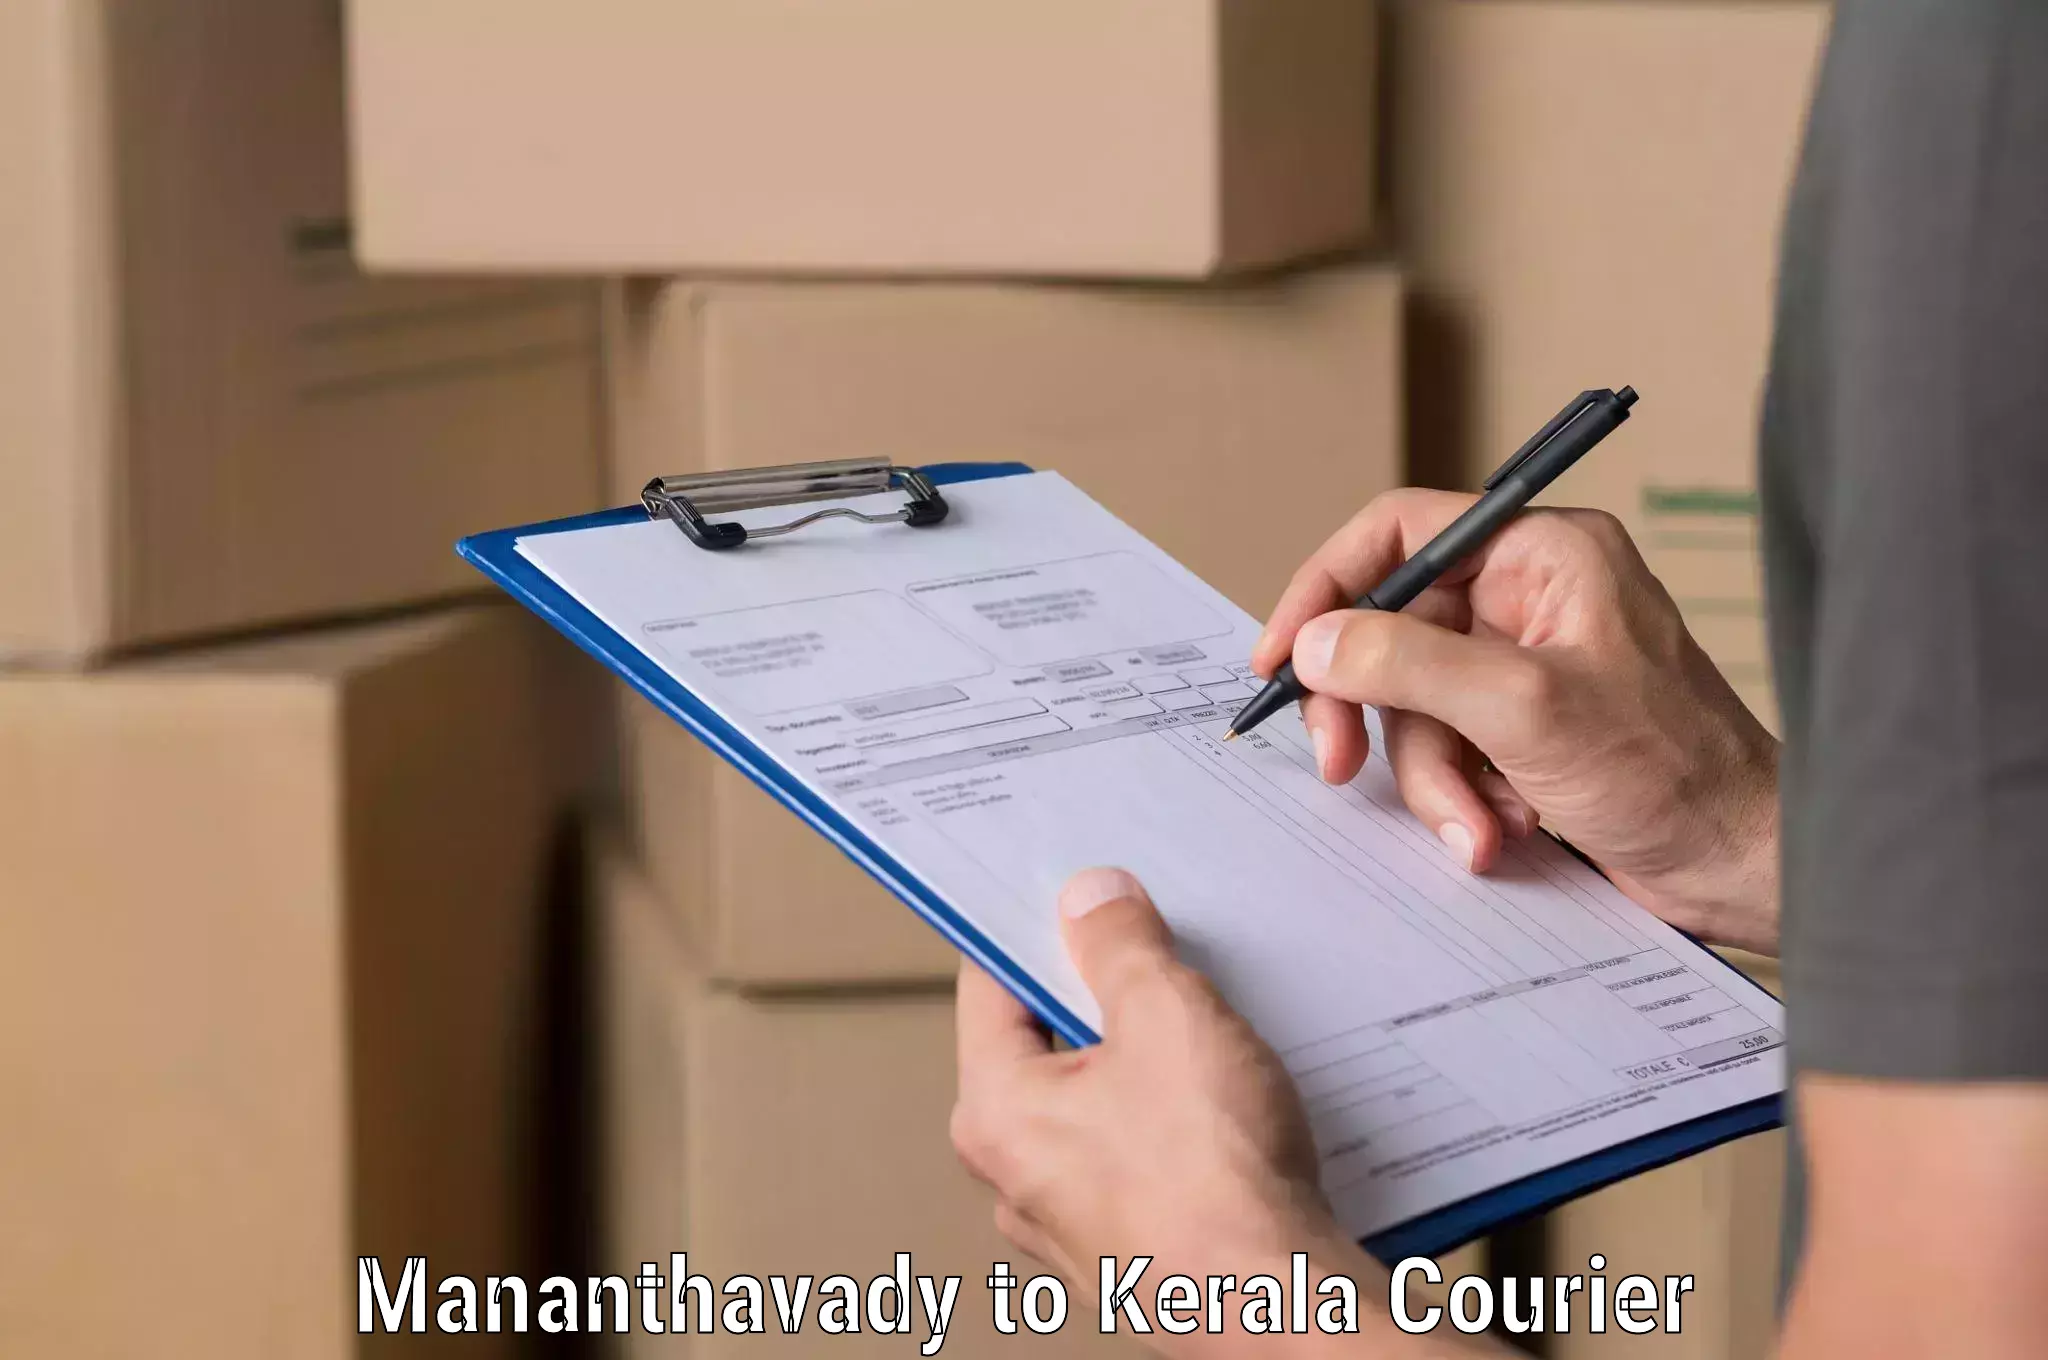 Fast delivery service Mananthavady to Pala